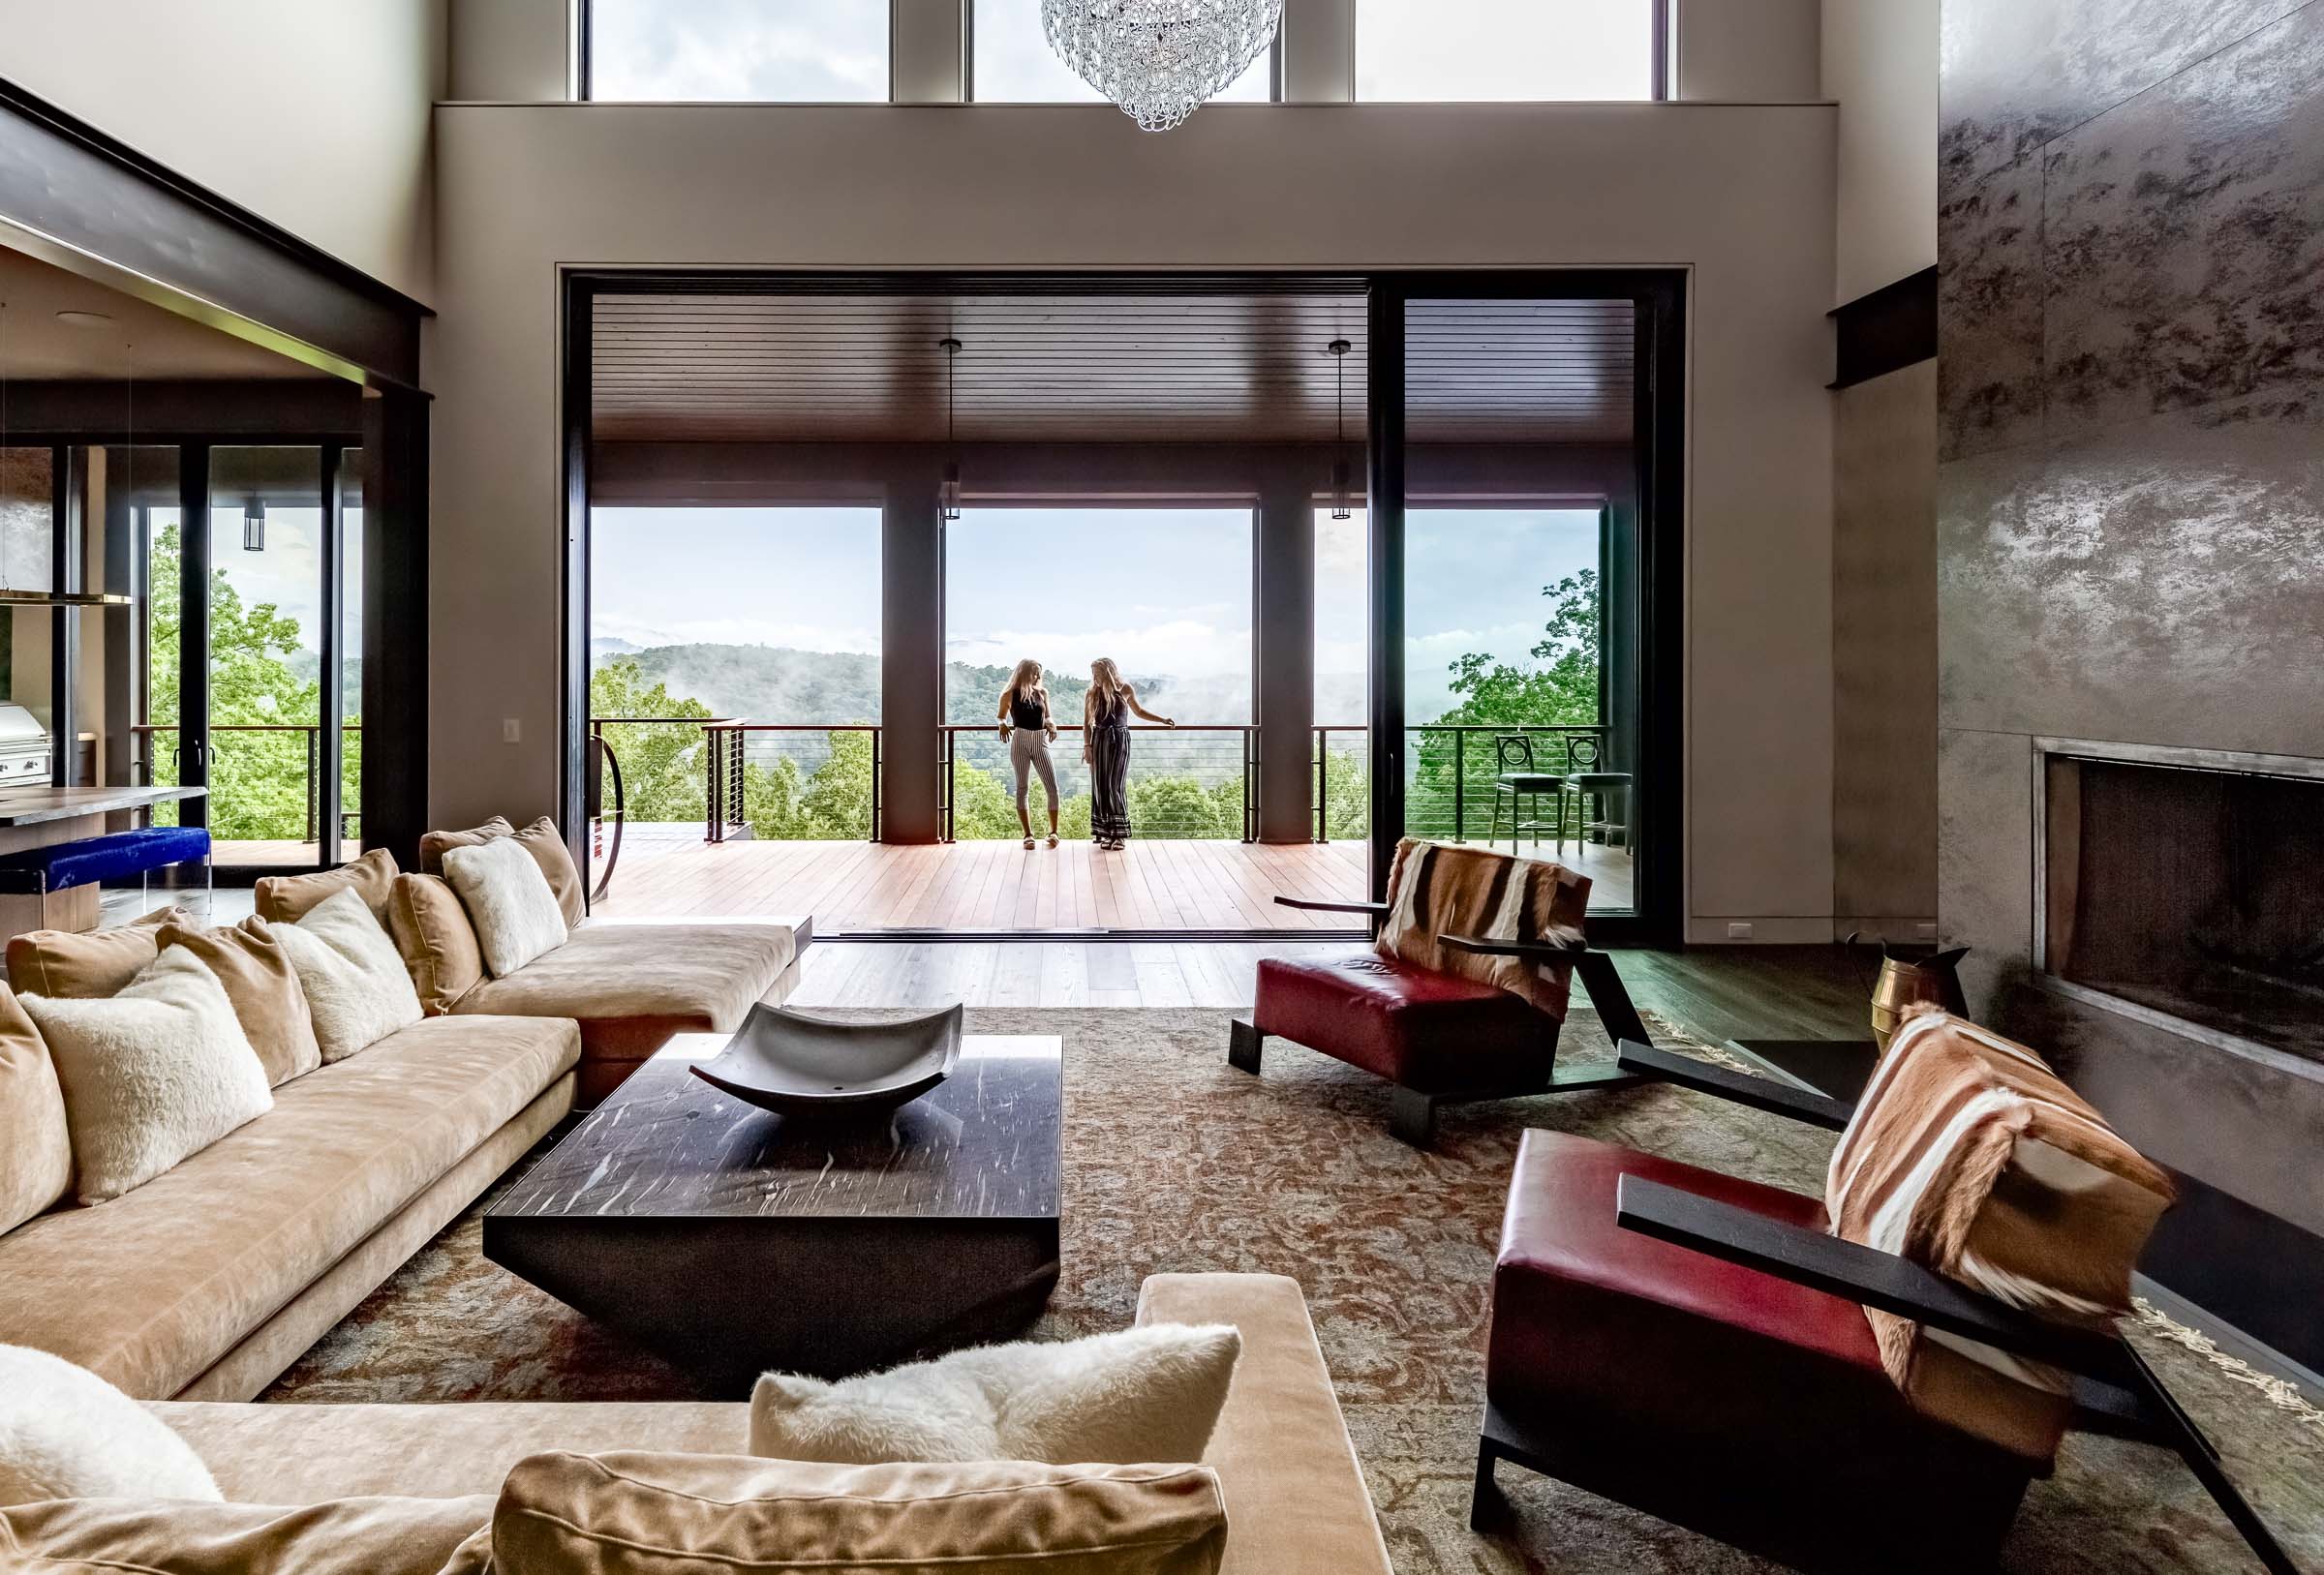 Modern living room with a view, in a neutral palette, in an award-winning house built by Bluestone Cosntruction in Asheville, North Carolina.